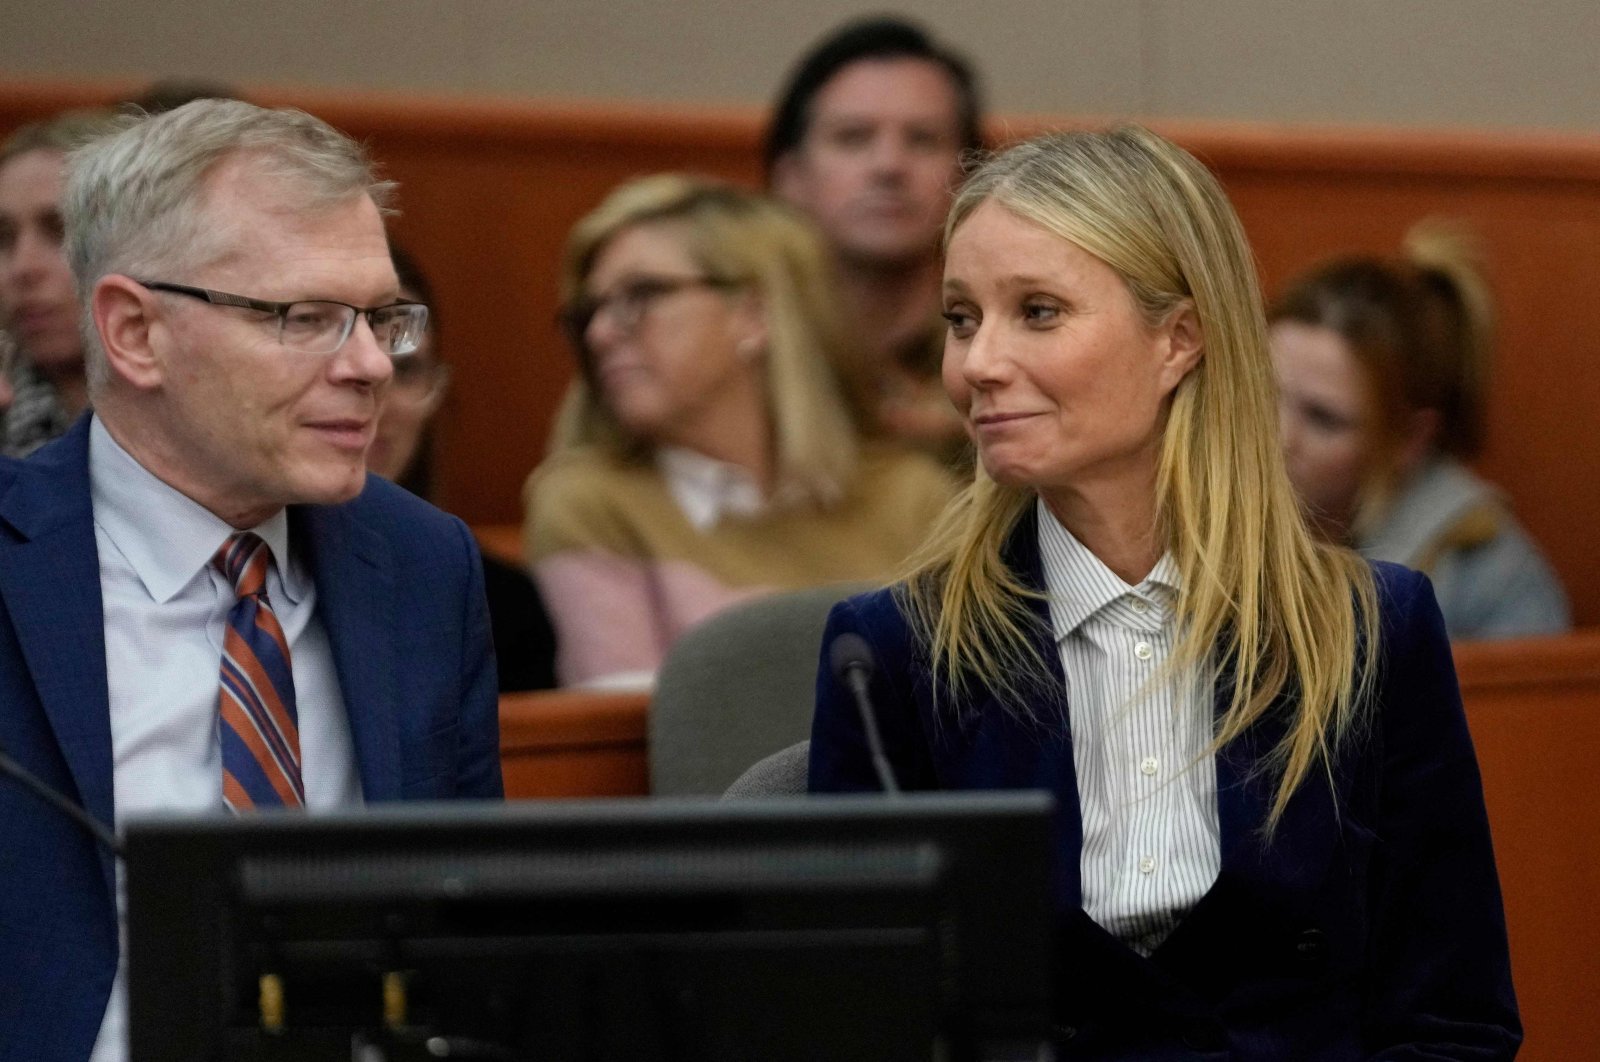 Actress Gwyneth Paltrow and her attorney Steve Owens smile after the reading of the verdict during her trial, in Park City, Utah, U.S., March 30, 2023. (AFP Photo)